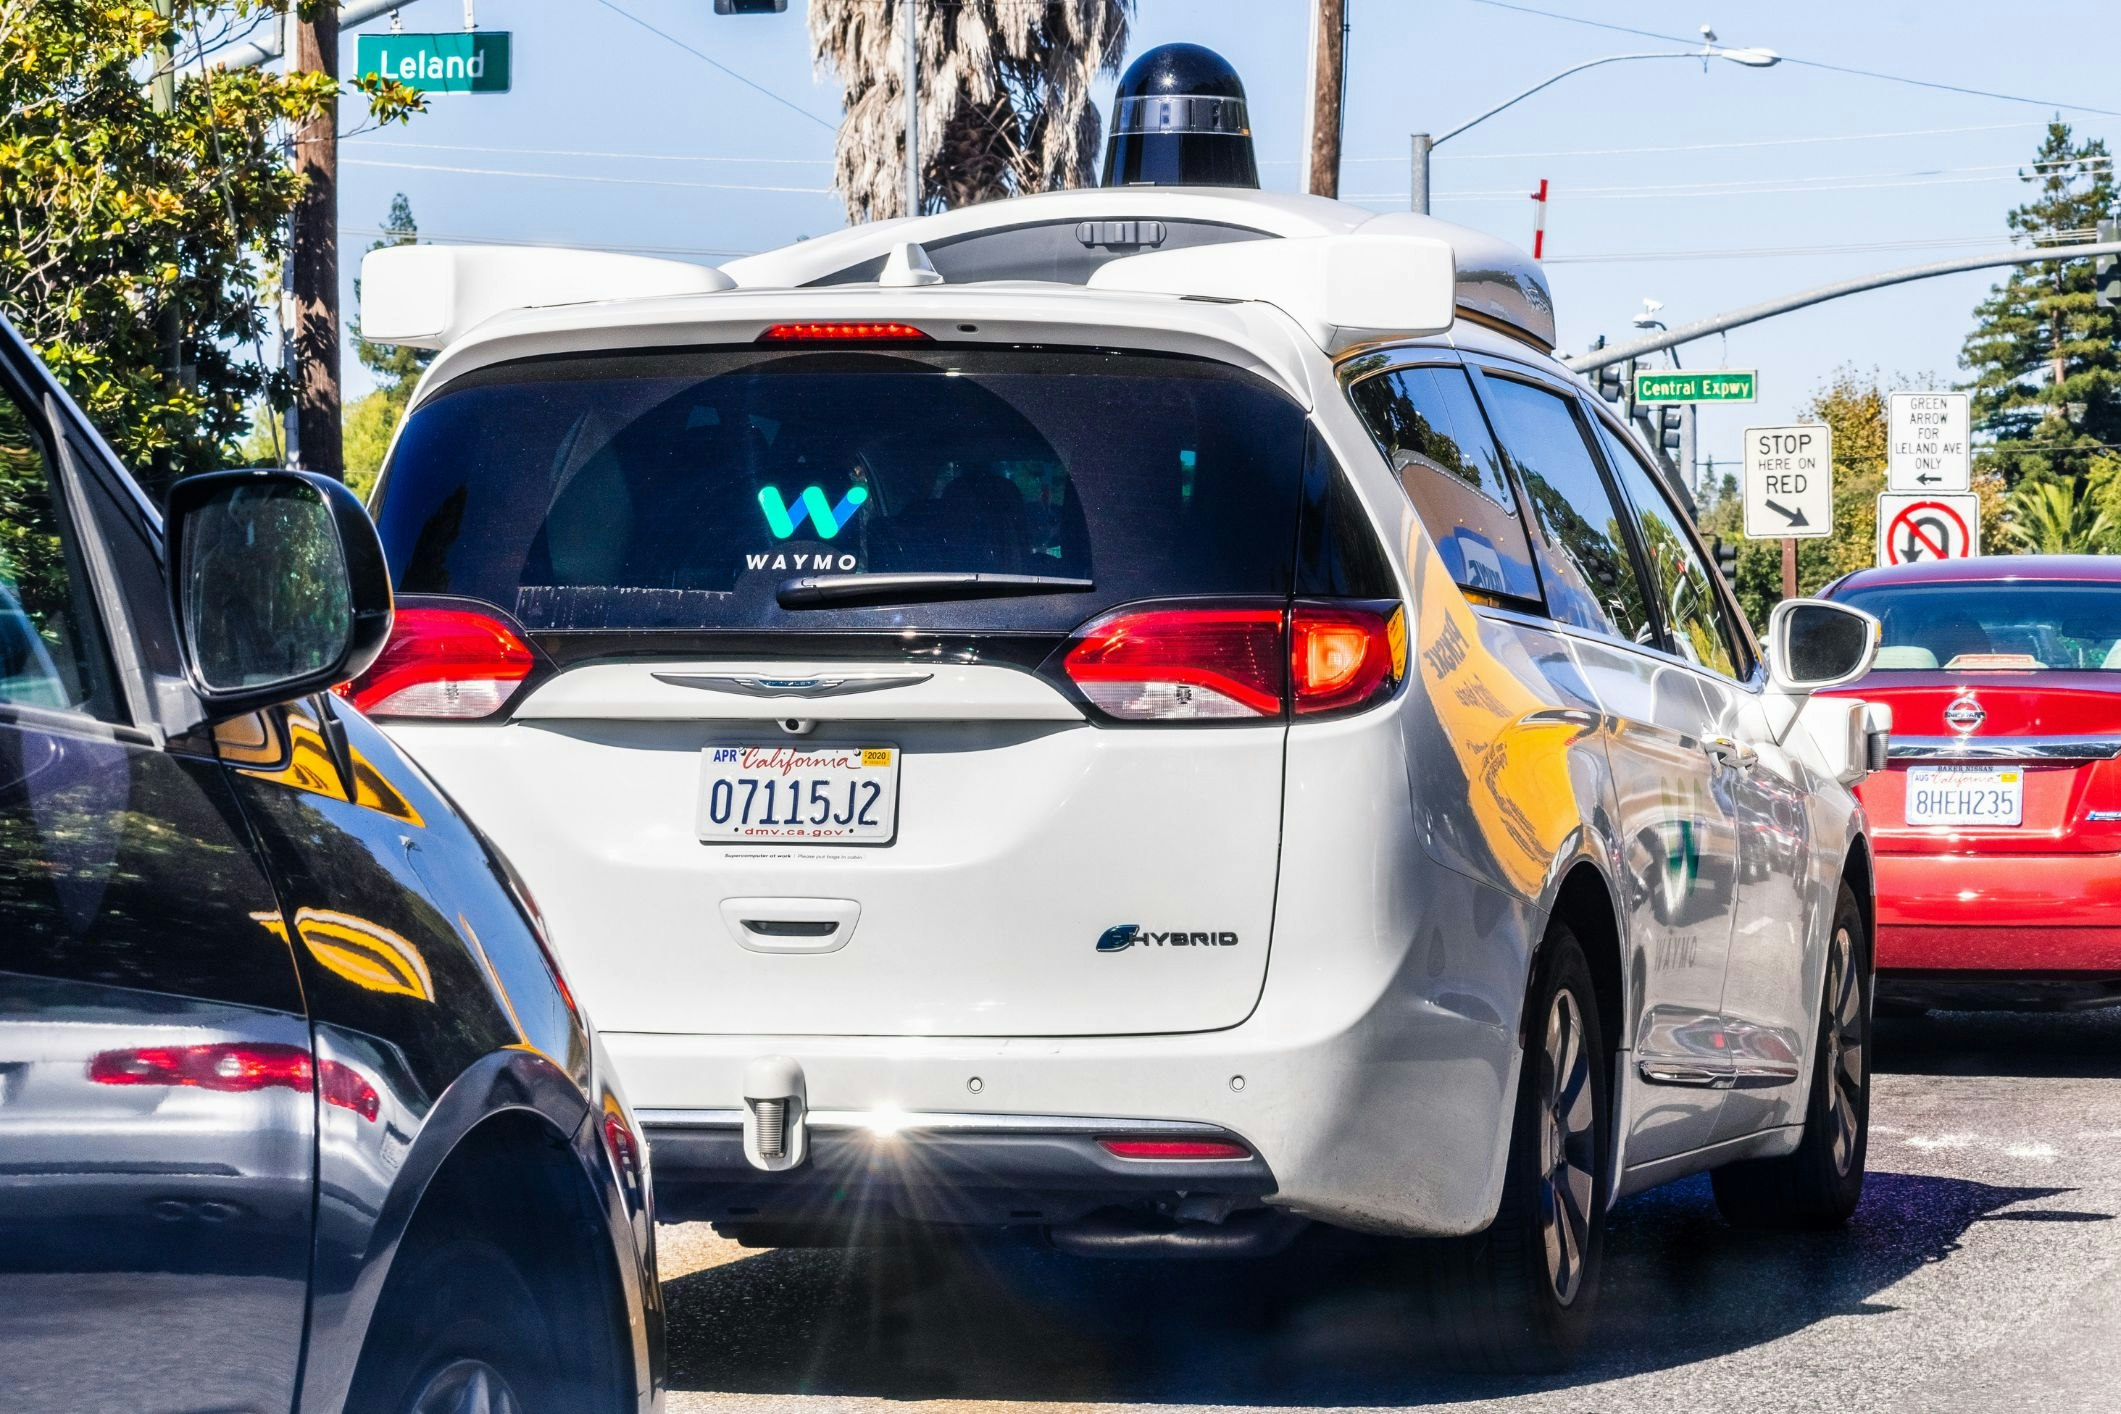 Waymo, formerly known as the ‘Google Self-Driving Car Project’ had been founded to increase mobility access and reduce human error associated harm. [Source: Sundry Photography via Shutterstock]
